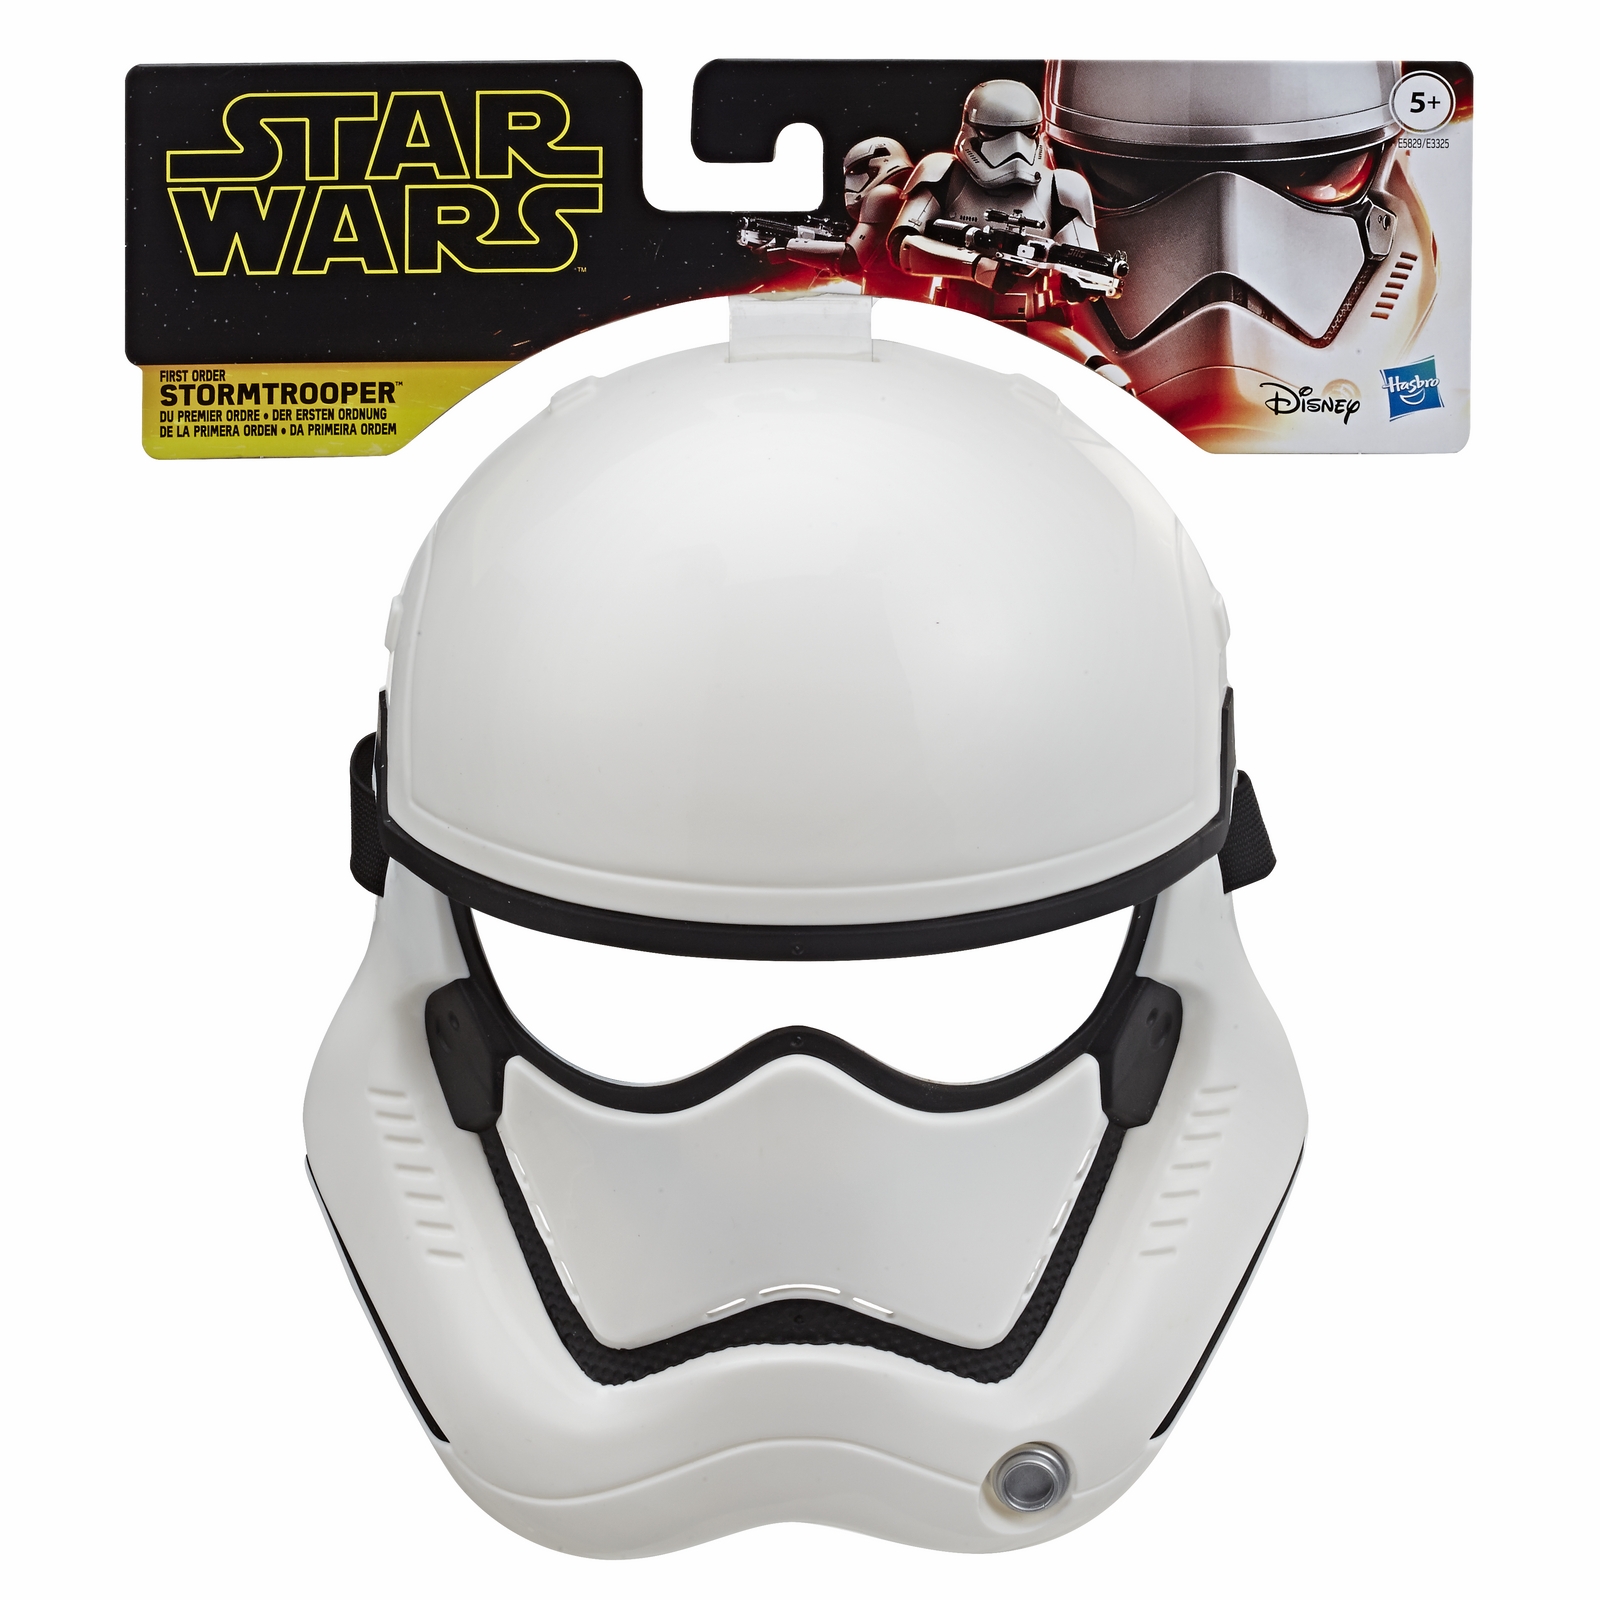 STAR WARS ROLE-PLAY MASK Assortment - in pck (Stormtrooper).jpg